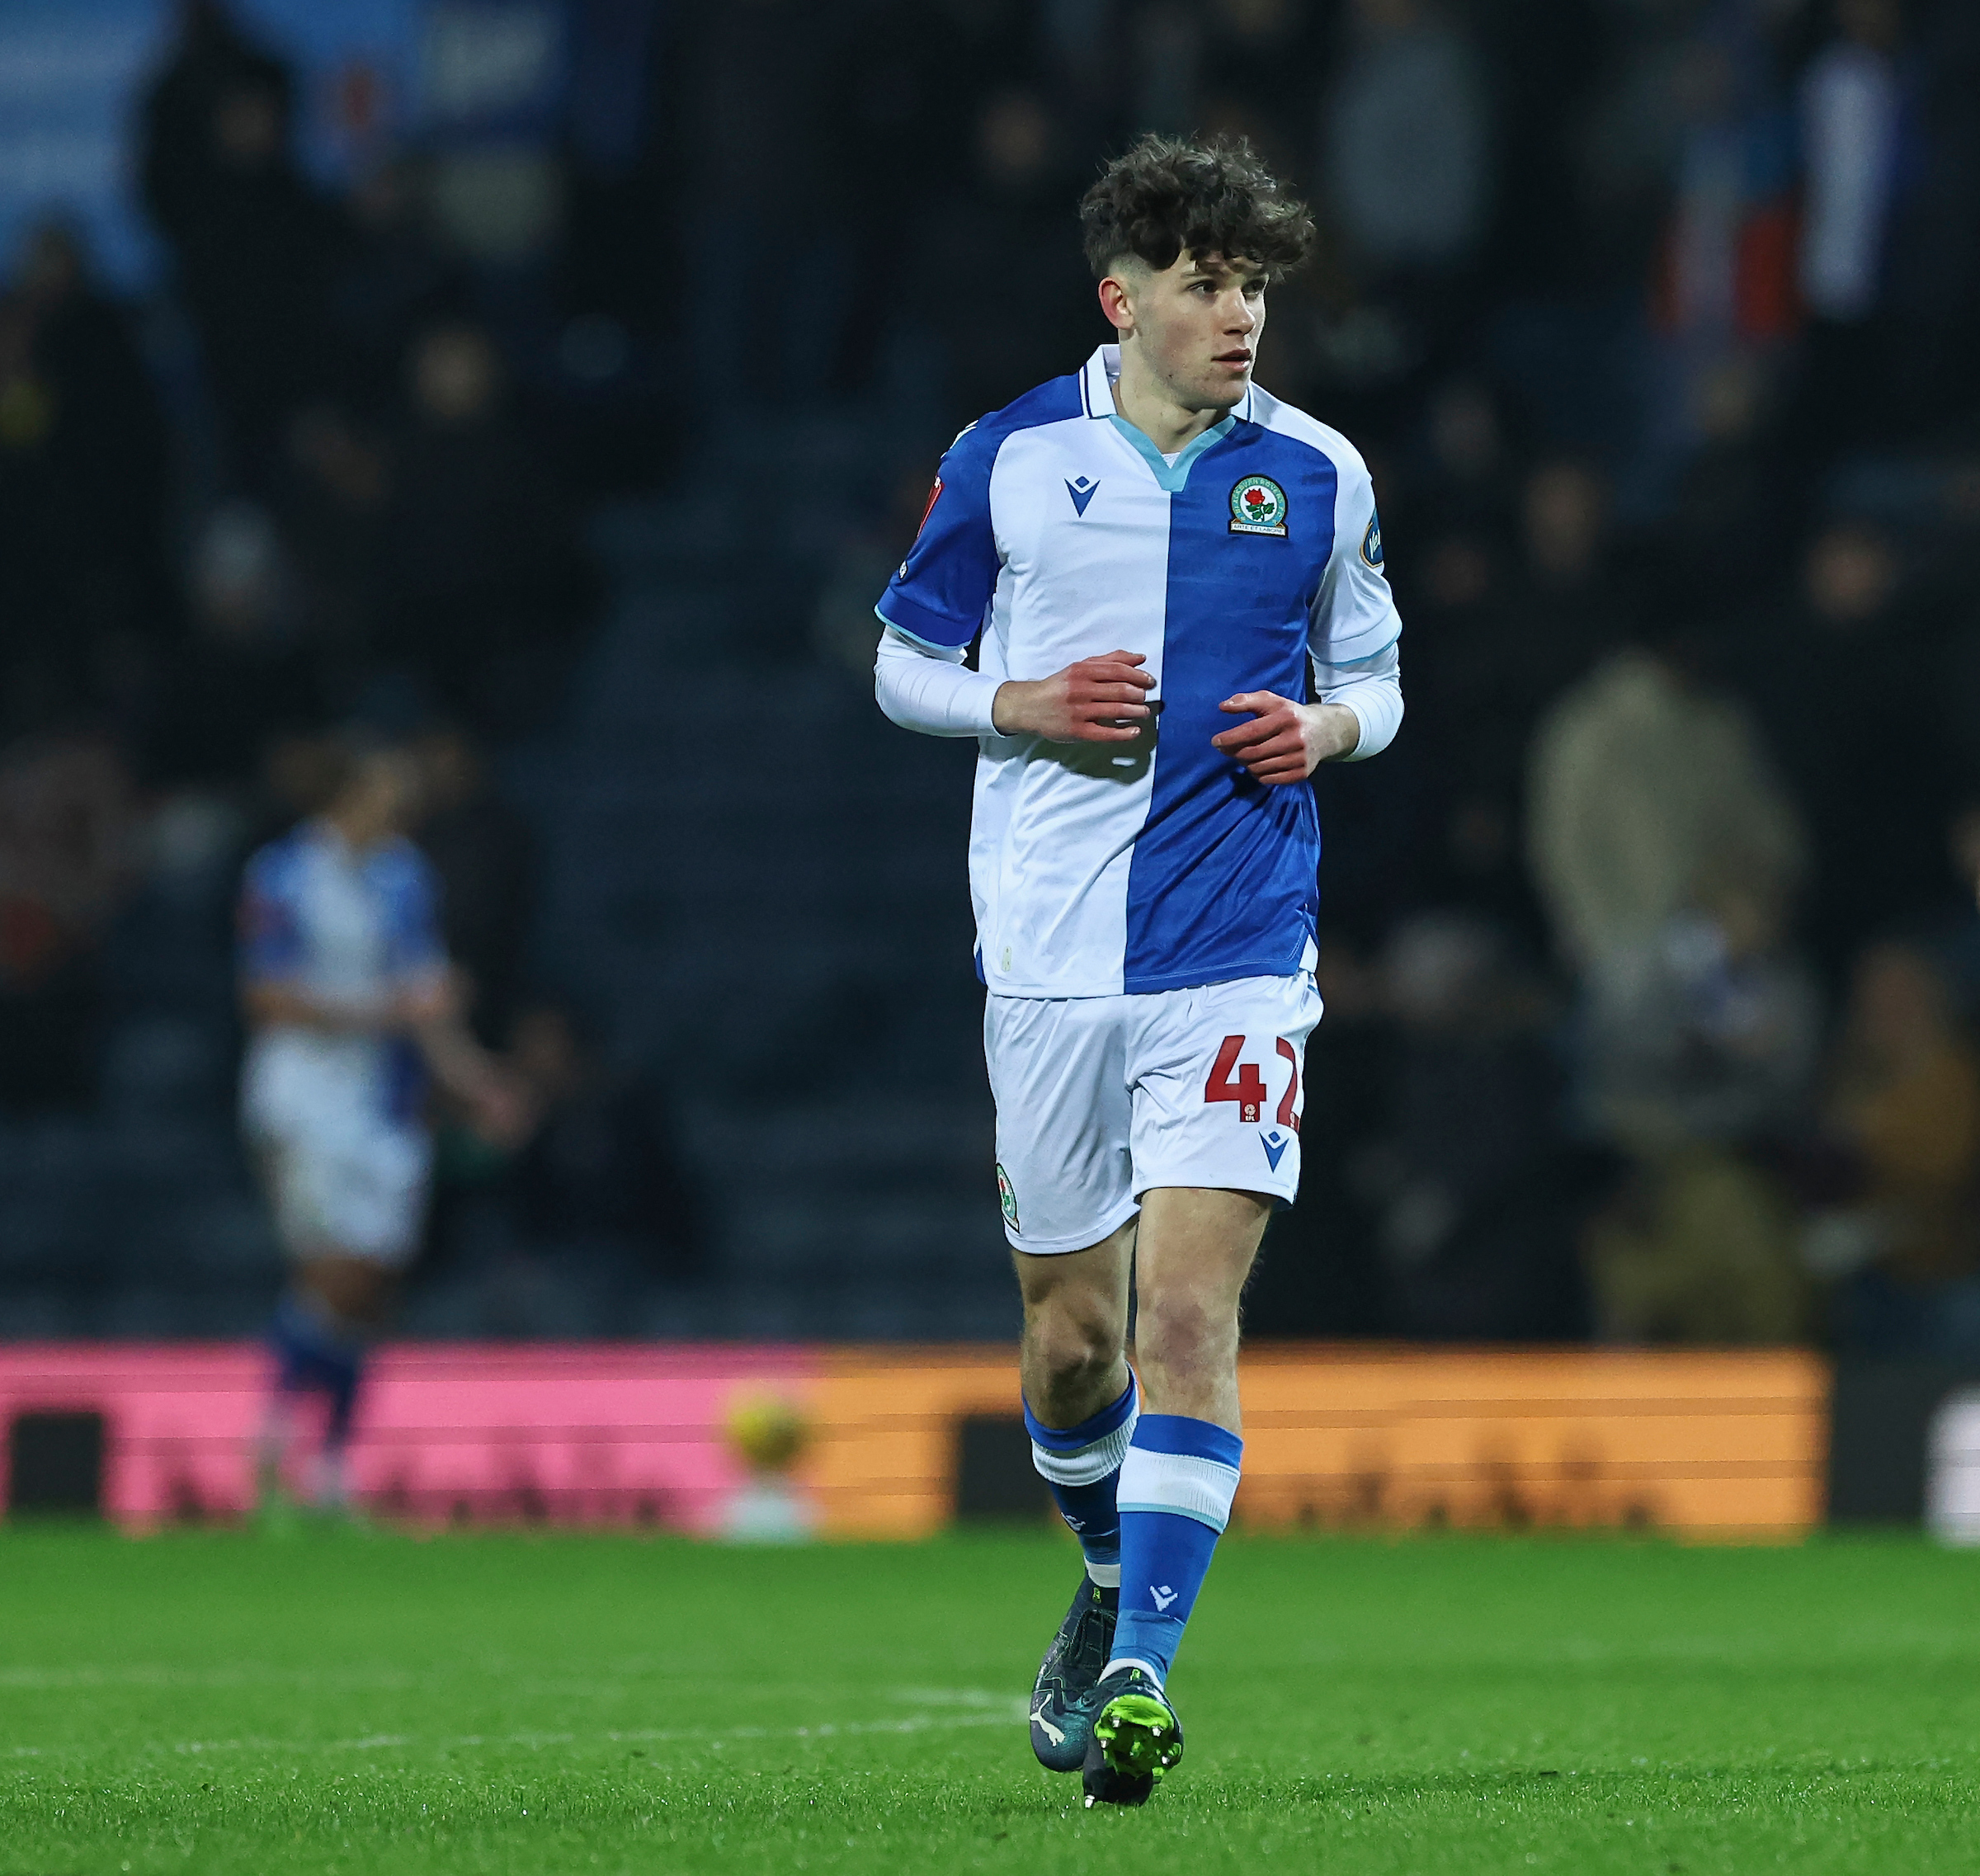 Newcastle United hope to sign Rory Finneran from Blackburn Rovers